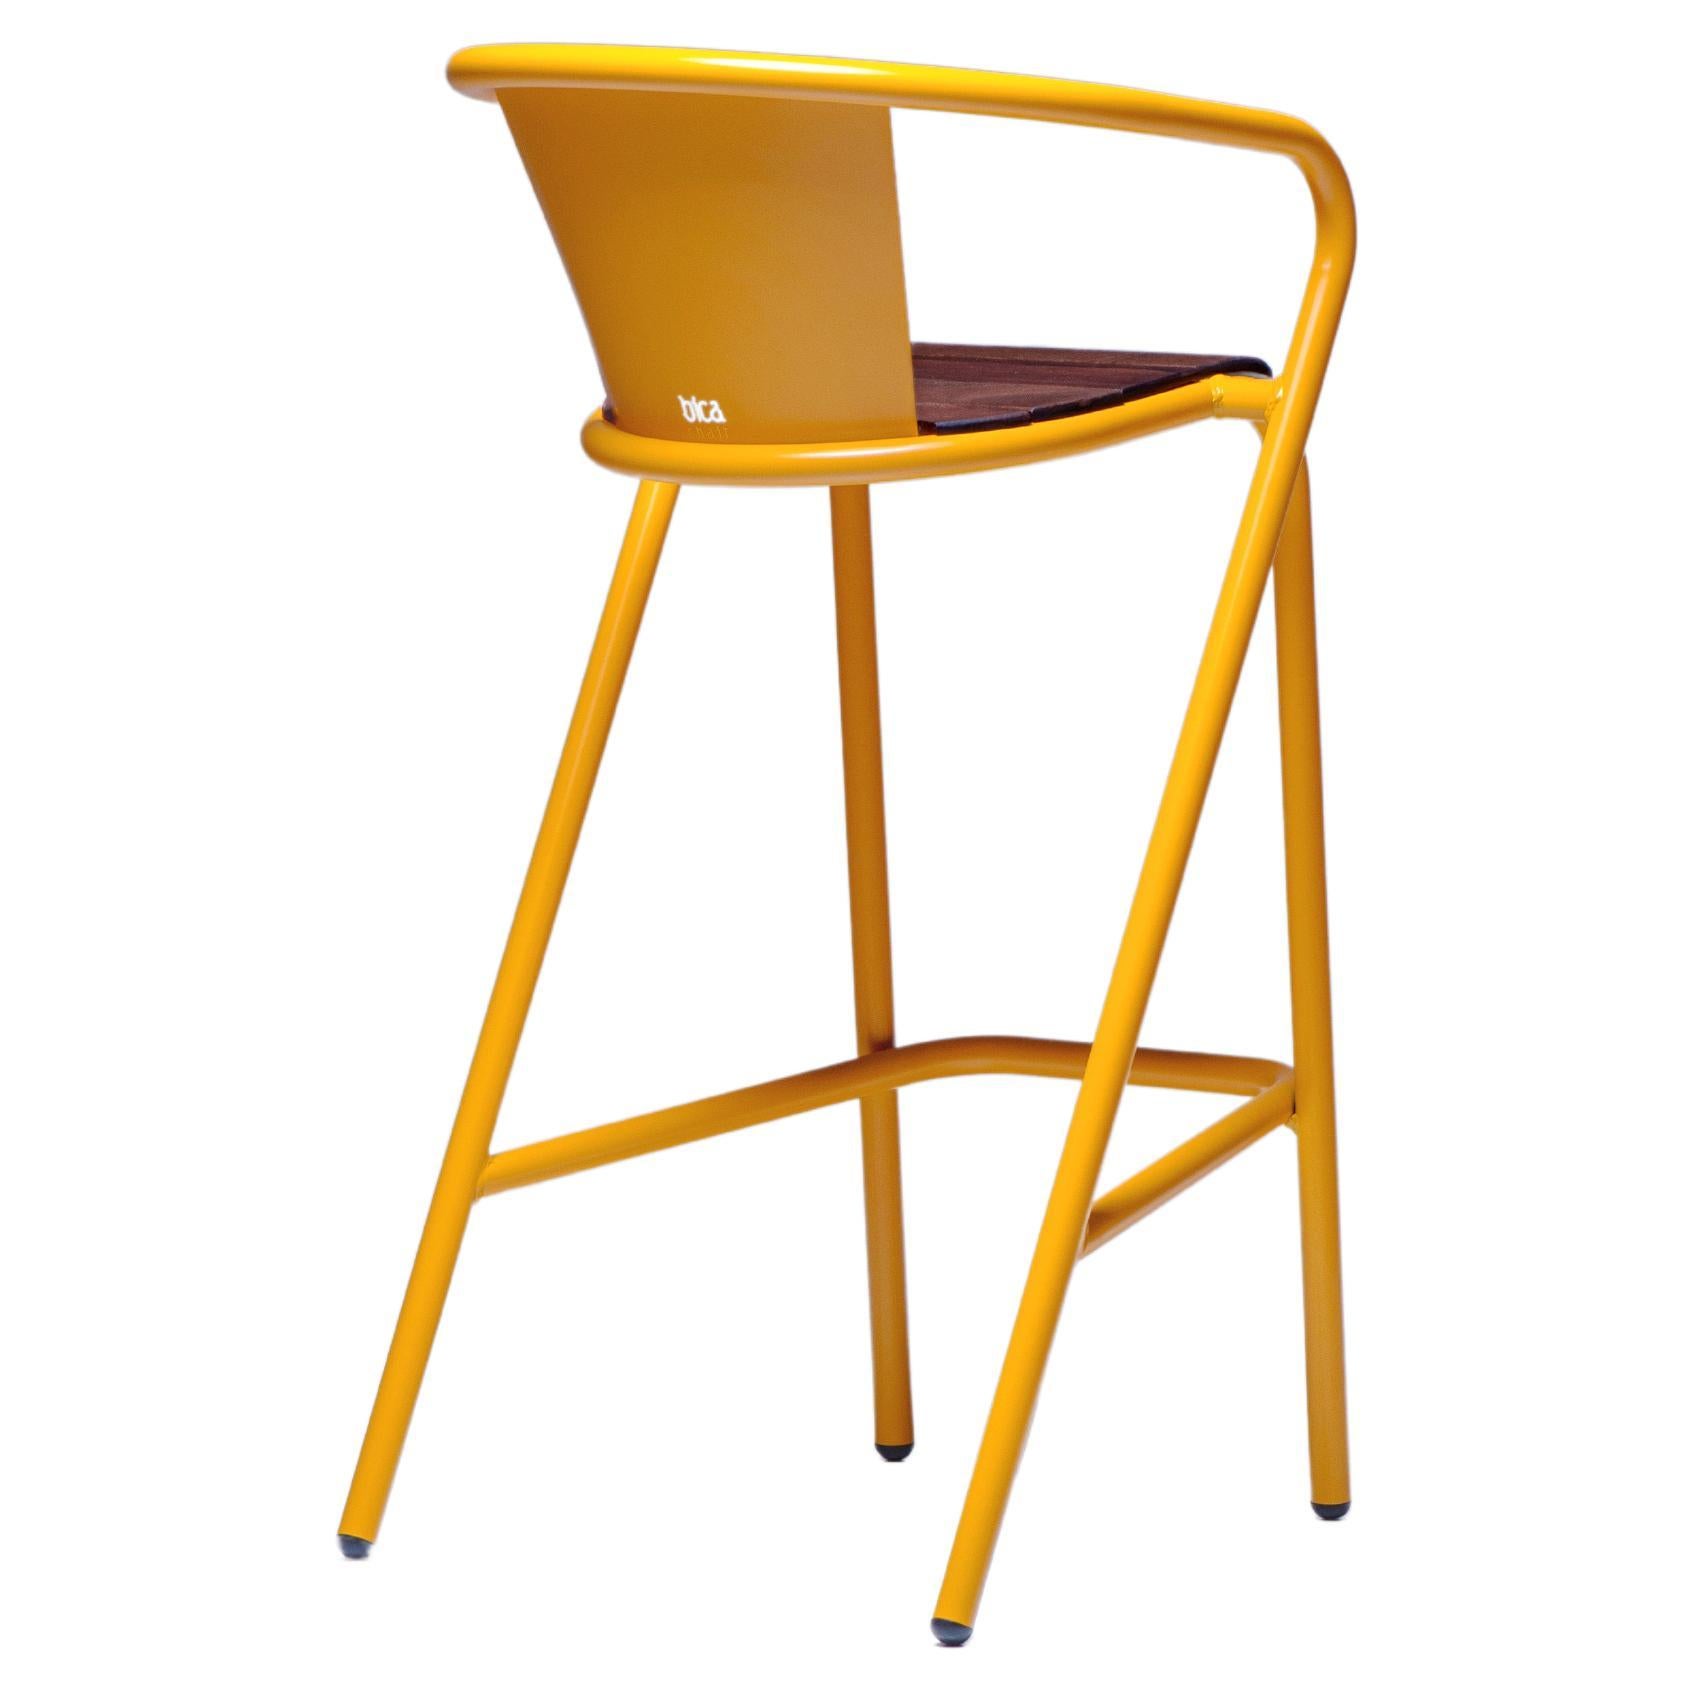 BICAstool Modern Outdoor Steel High Stool Chair Melon Yellow with Ipê Wood Slabs For Sale